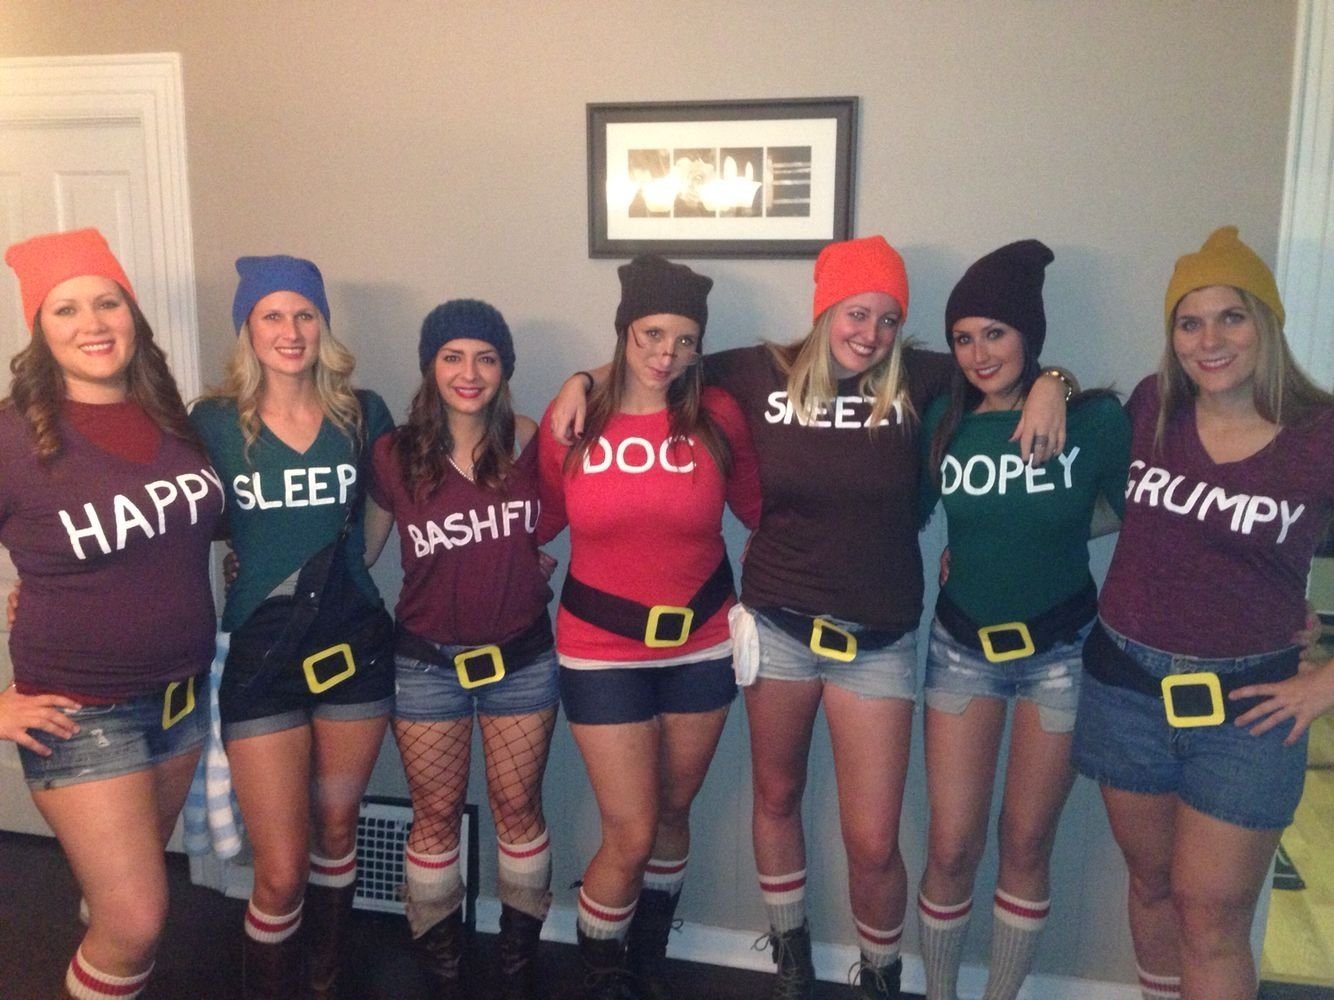 70 Group Halloween Costume Ideas For The Win